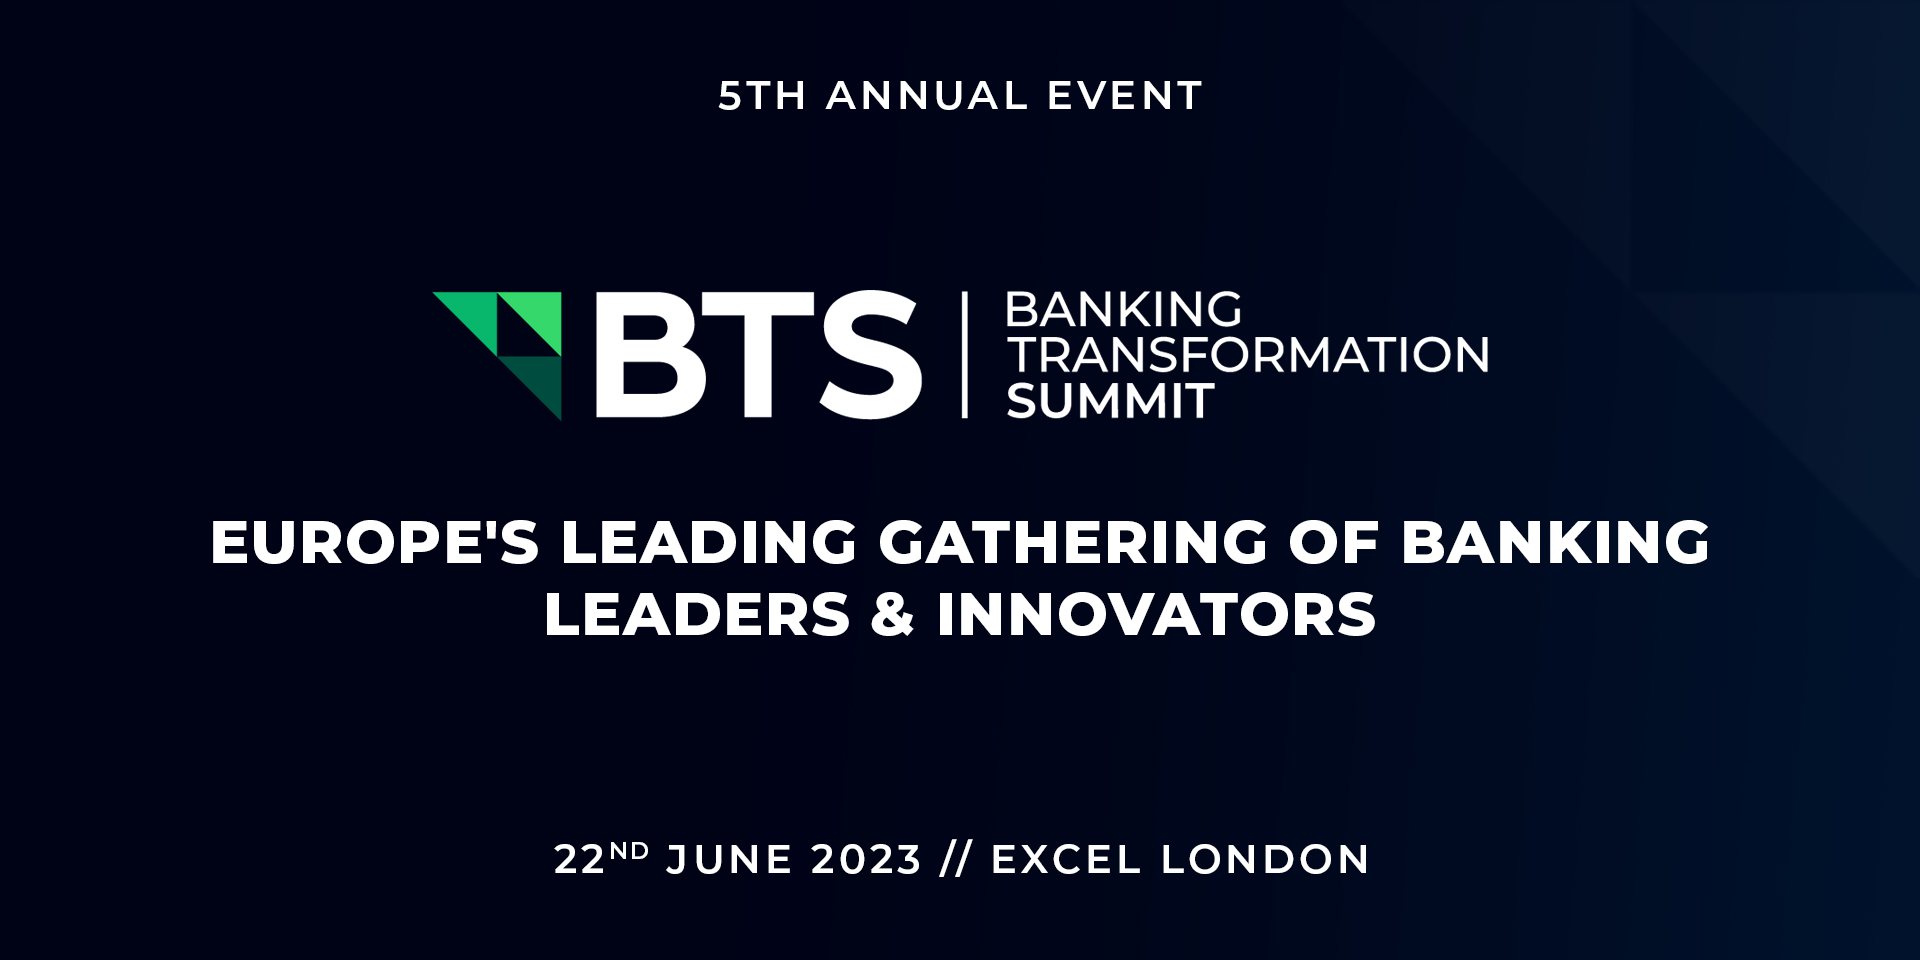 Banking Transformation Summit organized by Next In Tech